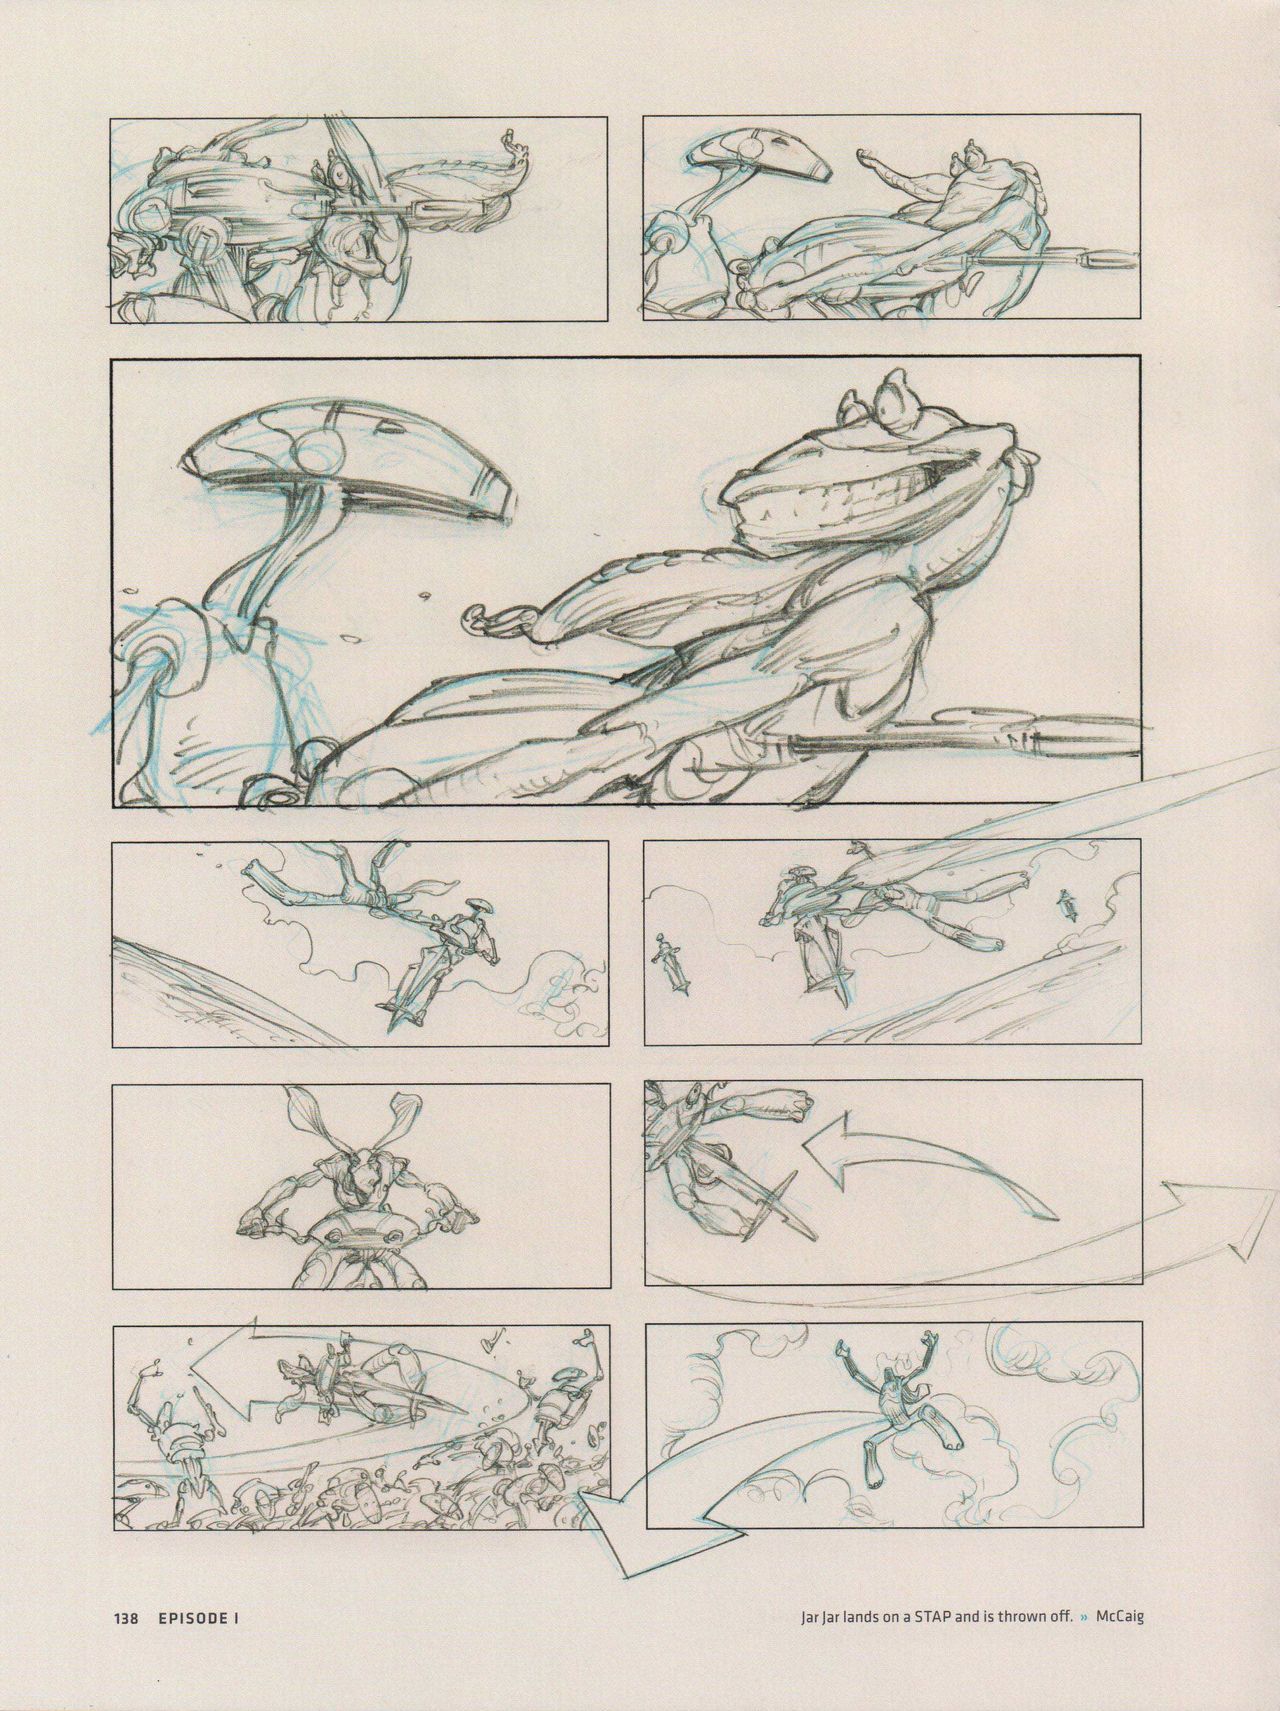 Star Wars Storyboards - The Prequel Trilogy 142